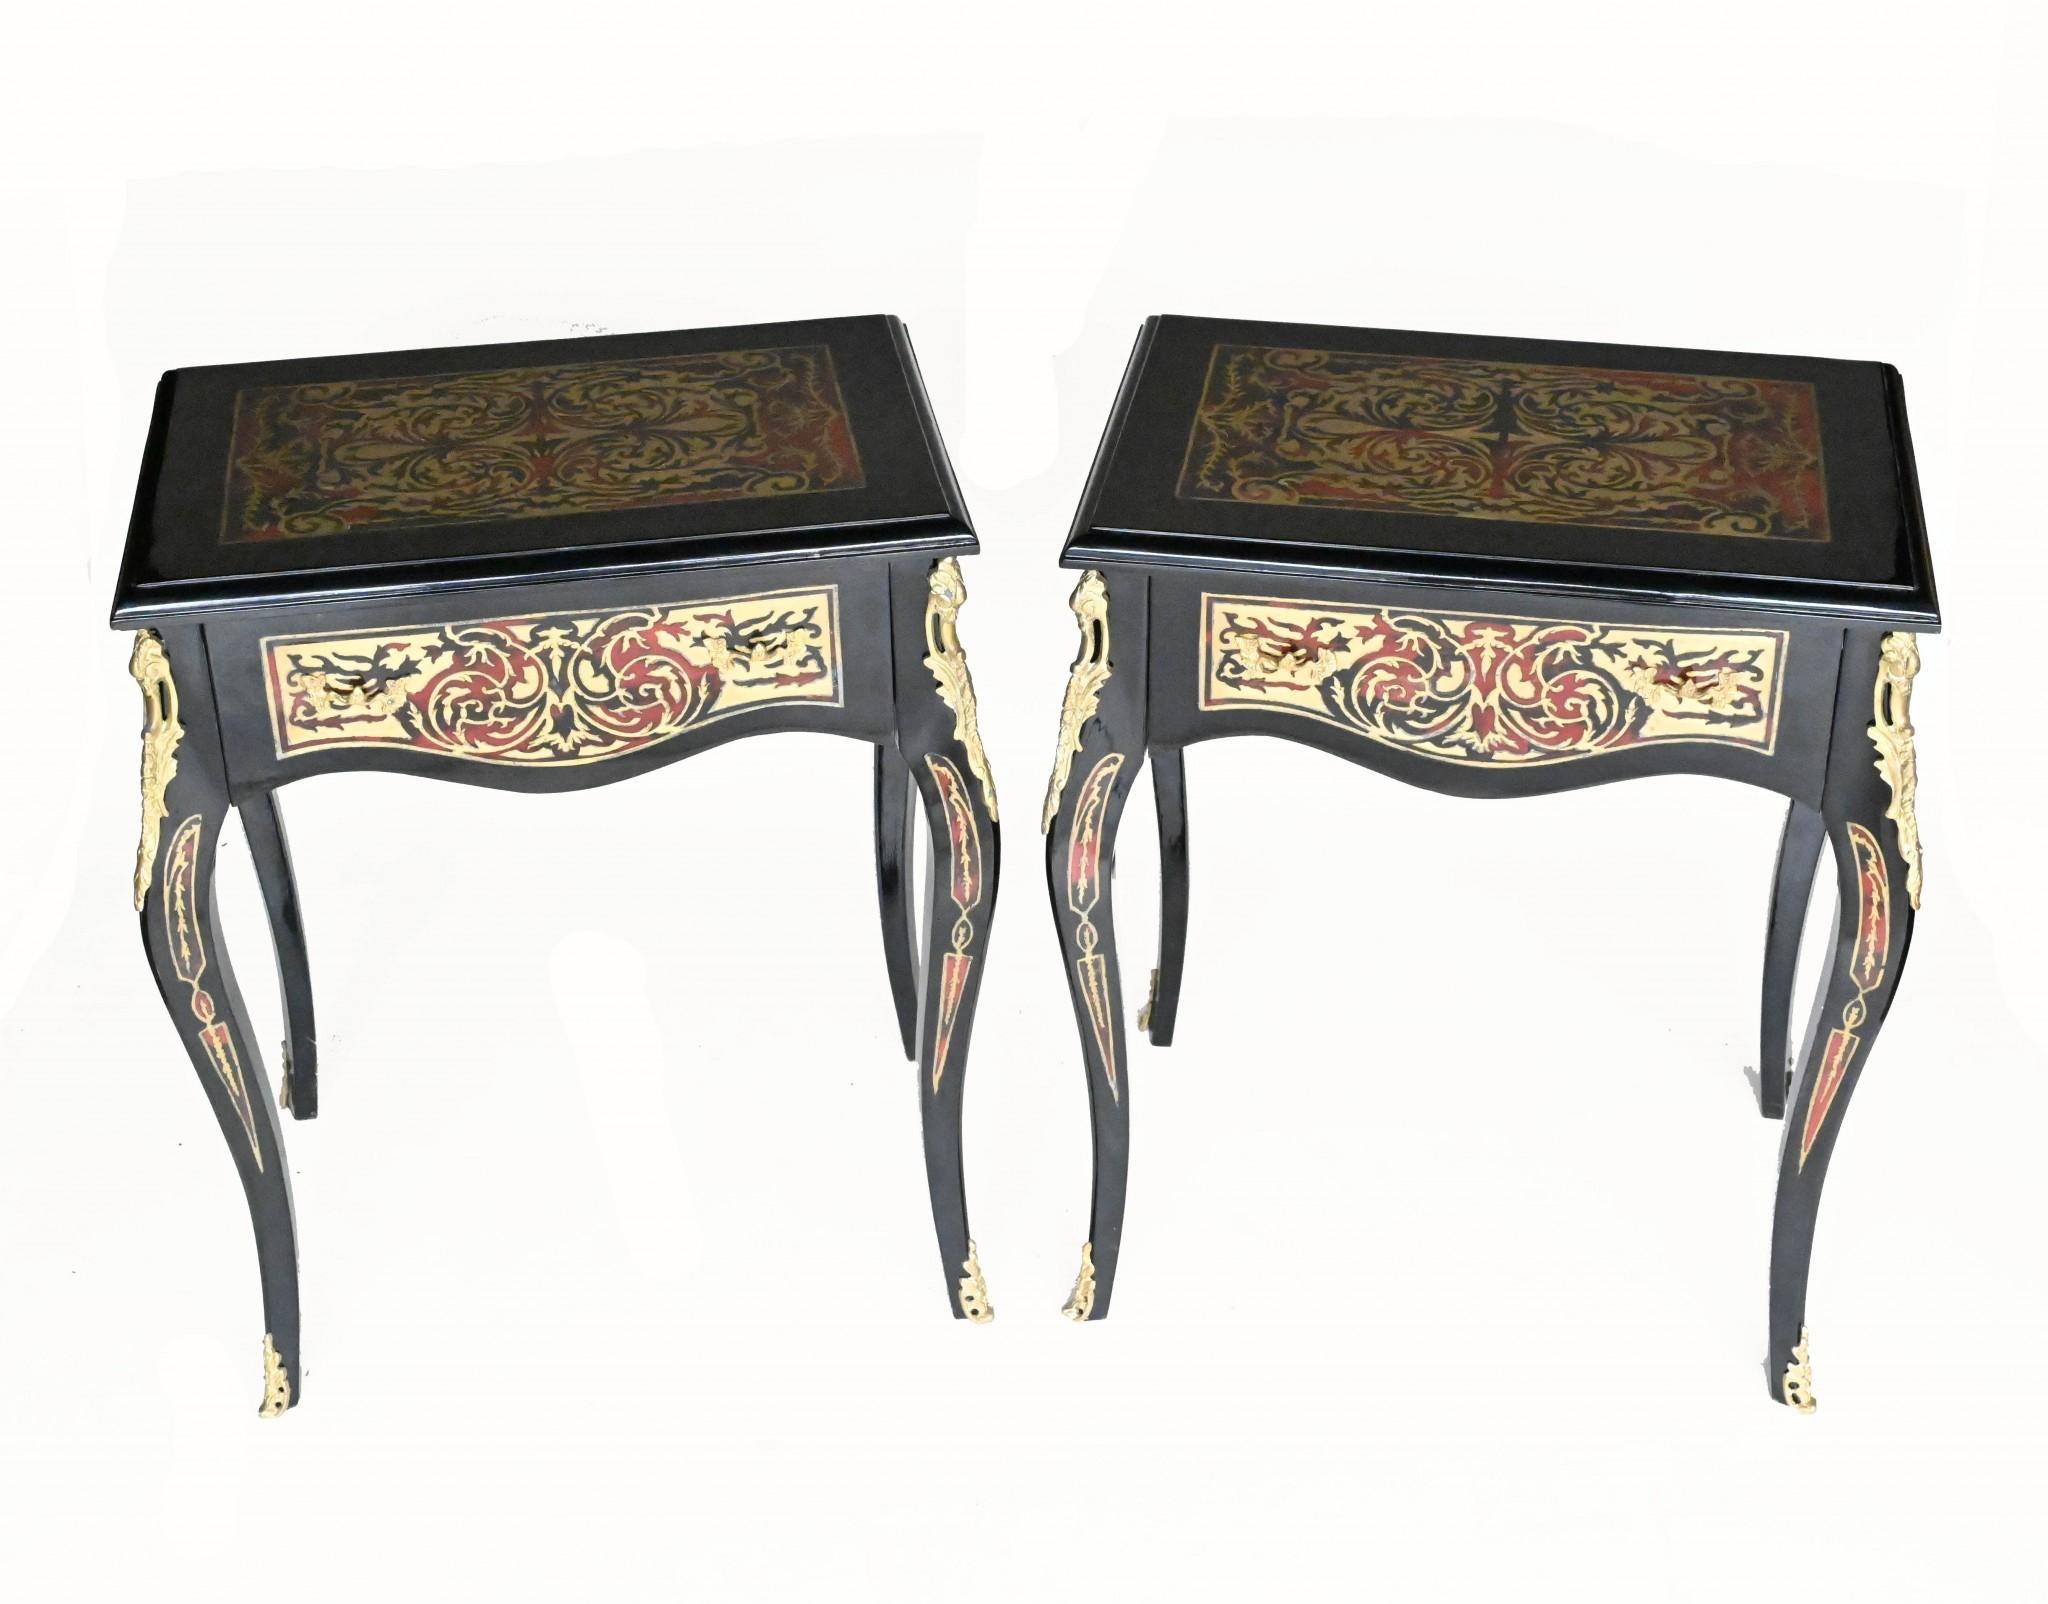 Stunning pair of French Boulle style side tables
Distinctive Boulle inlay with brass and tort designs hand cut
Bought from a dealer at Les Puces flea market in Paris
Lots of other Boulle pieces to match - Boulle desks, chests - etc so please get in